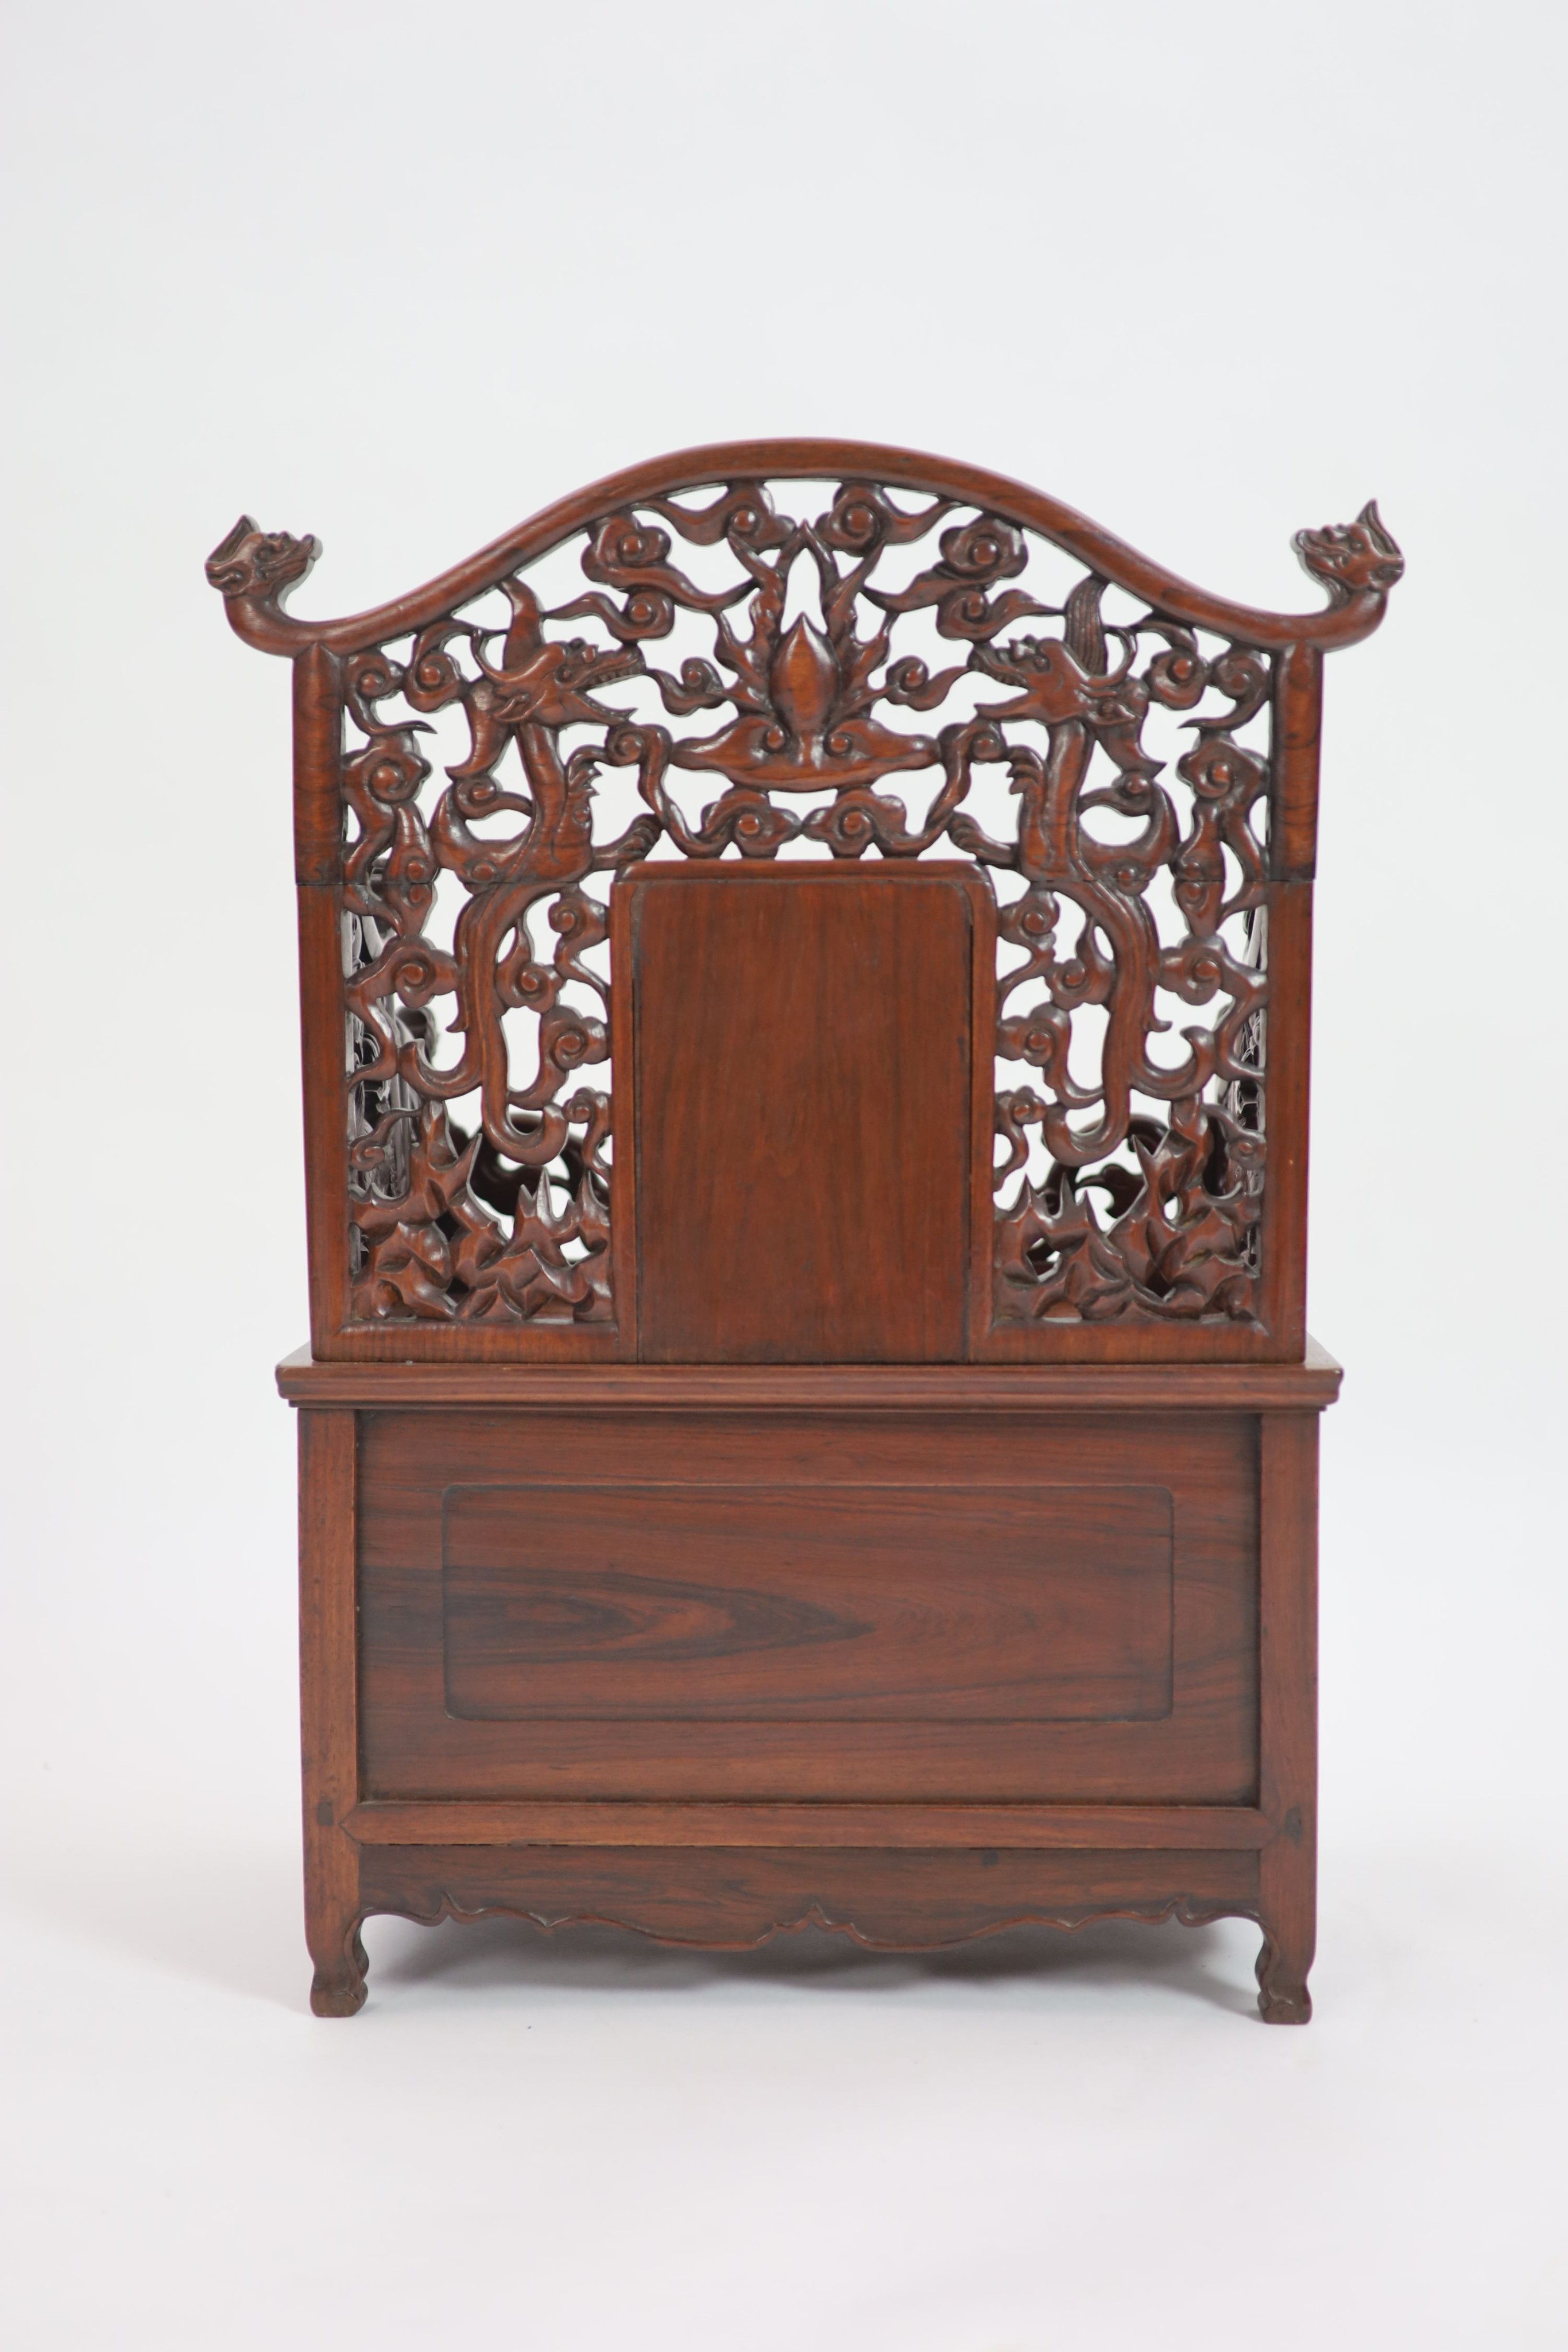 A fine Chinese huanghuali table cabinet, early Qing dynasty, 17th/18th century, 57.5 cm high, 42.5 cm wide